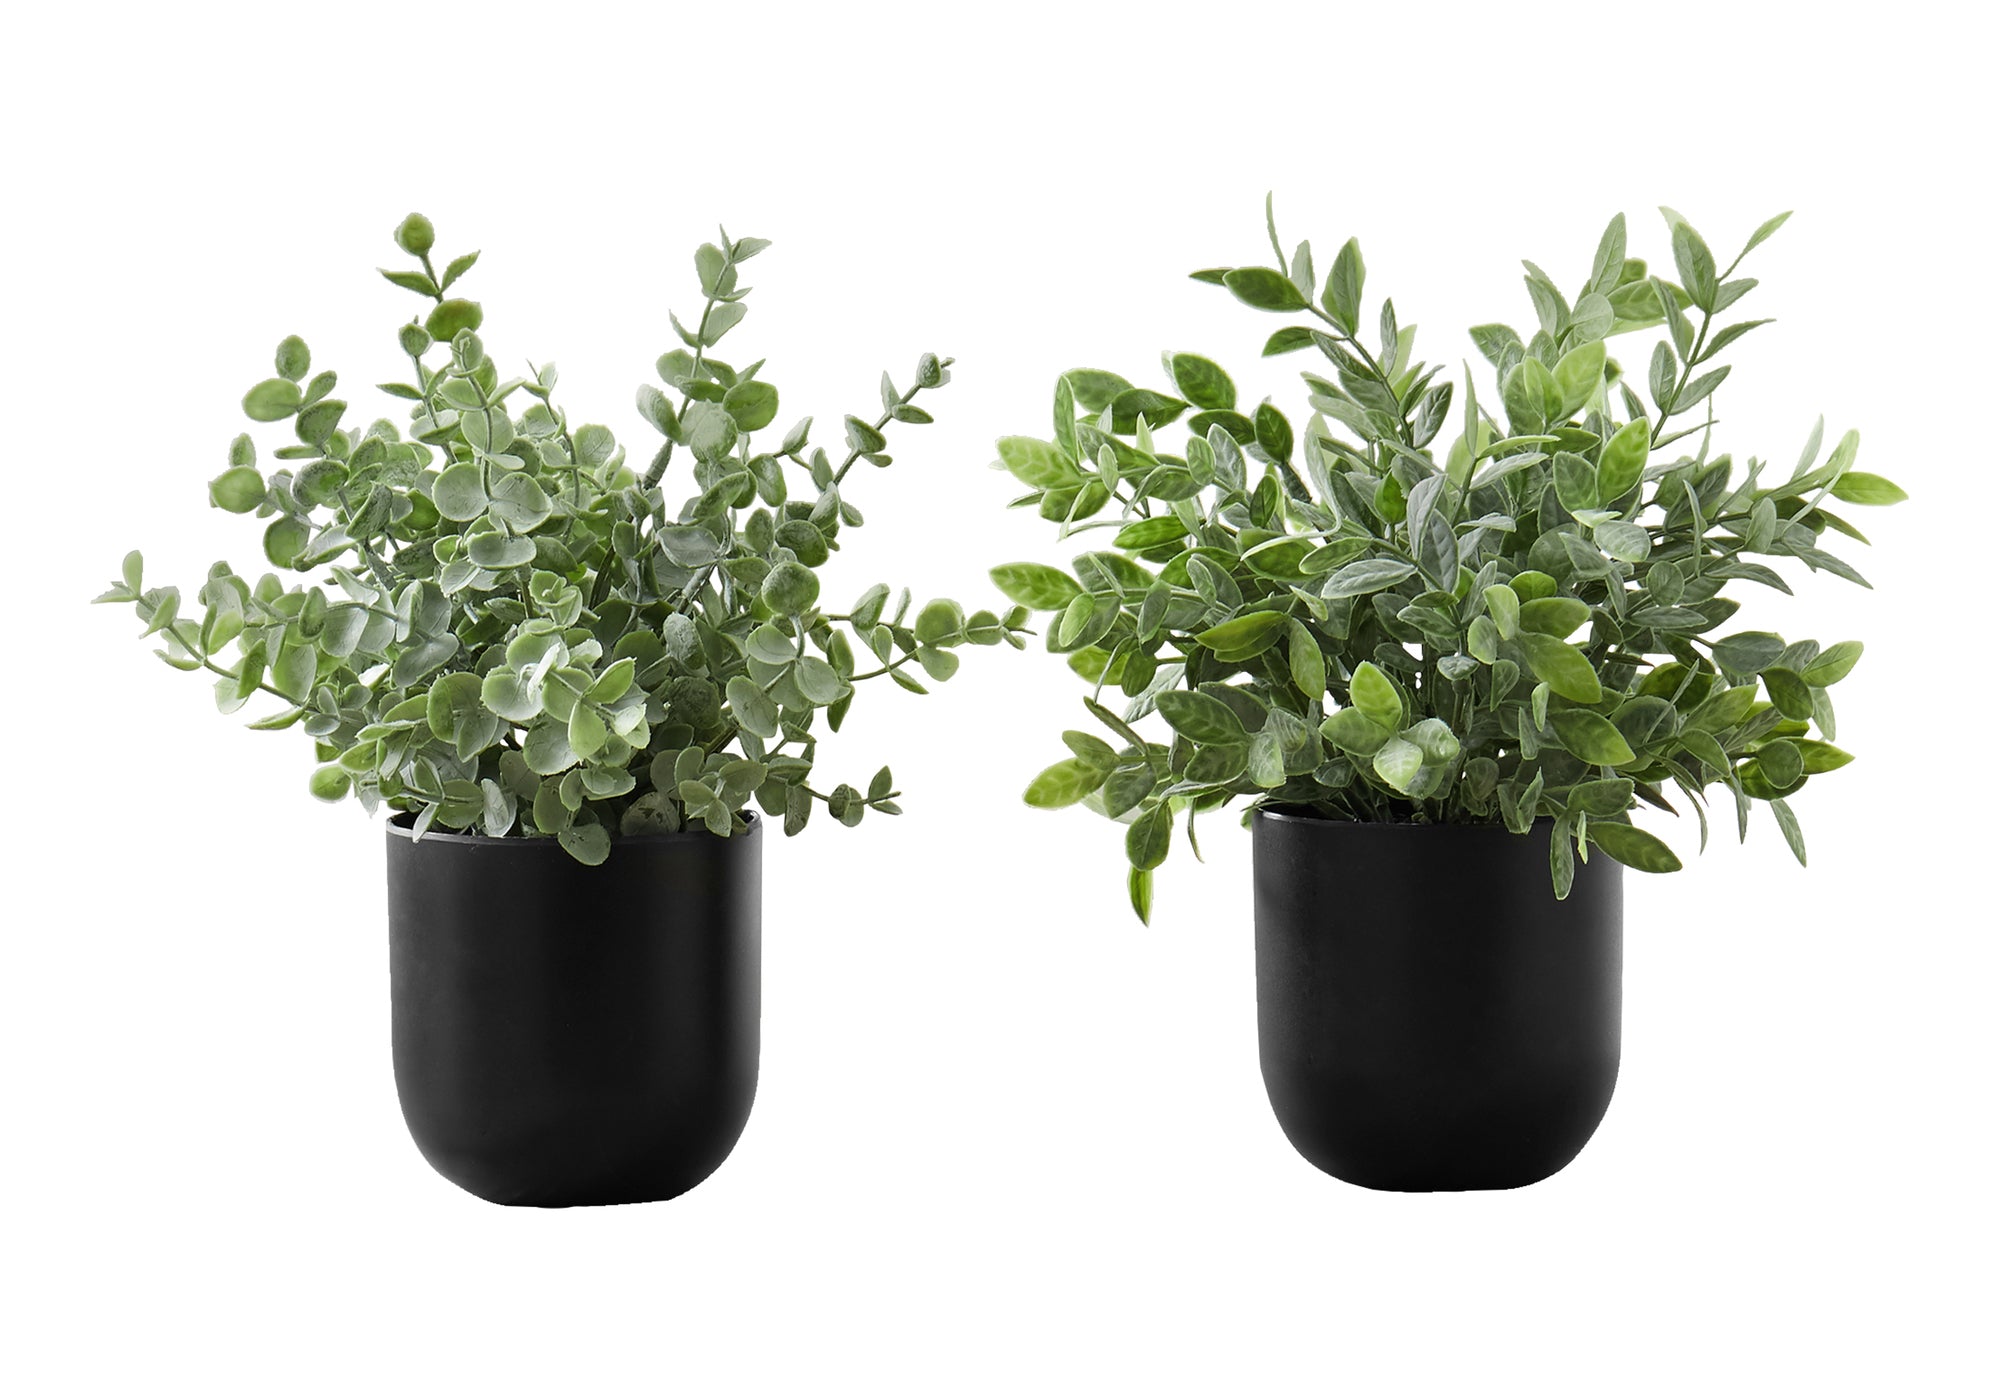 MN-709580    Artificial Plant, 11" Tall, Eucalyptus Grass, Indoor, Faux, Fake, Table, Greenery, Potted, Set Of 2, Decorative, Green Leaves, Black Pots